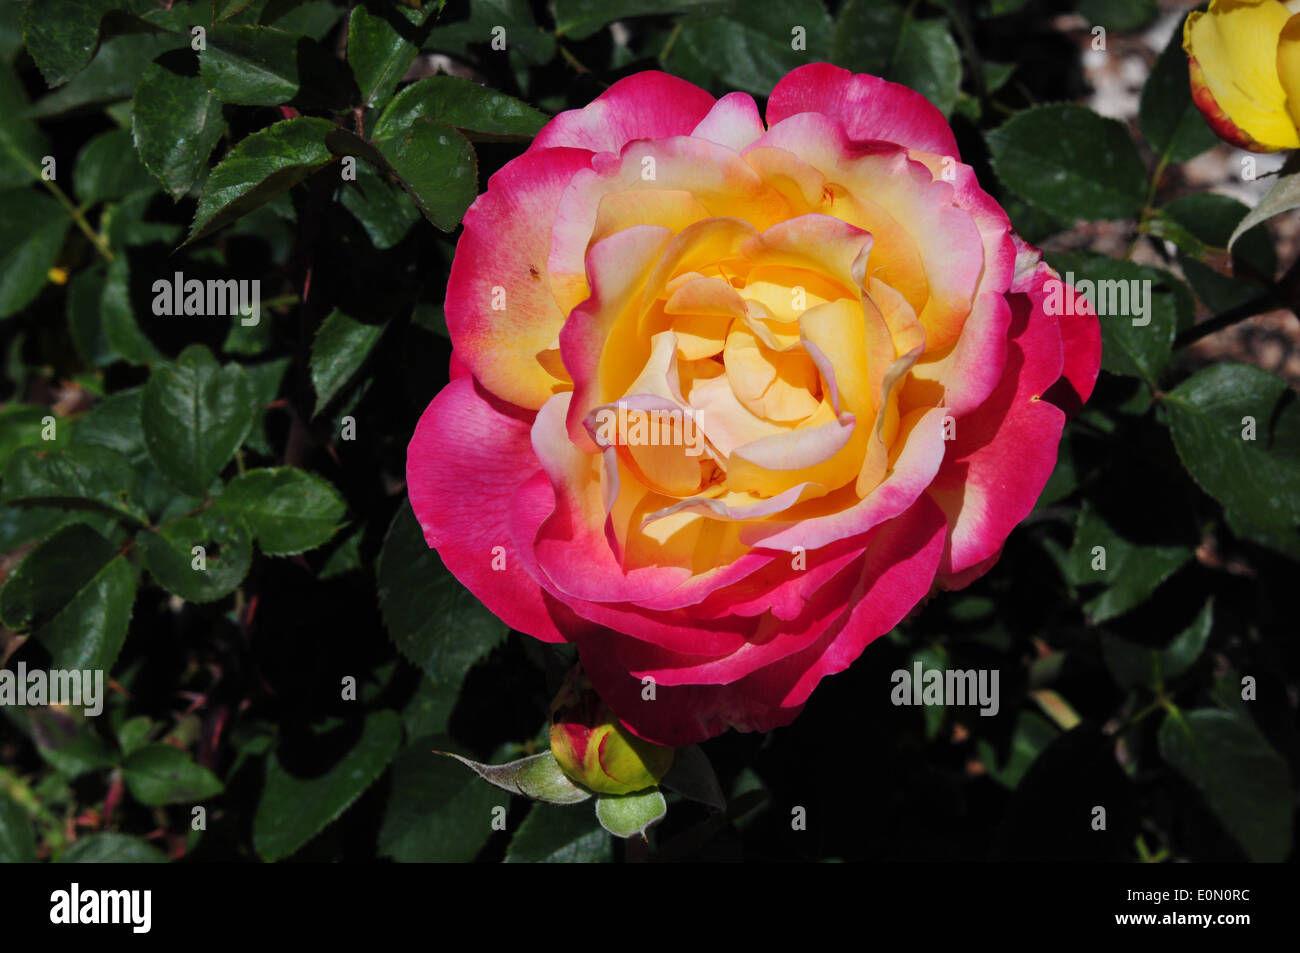 Party Time Hybrid Tea Rose in Park. Stock Photo